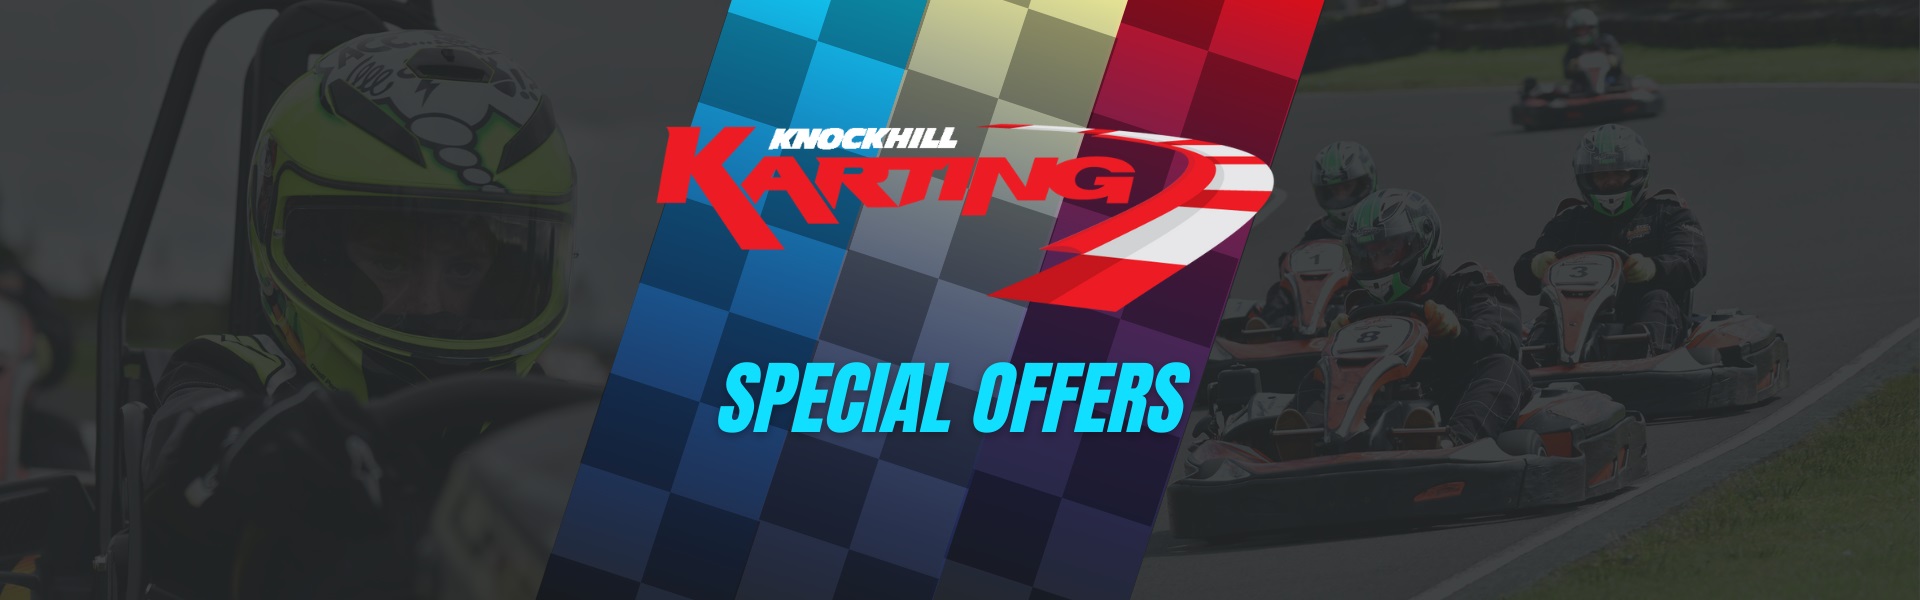 June Karting Special Offers